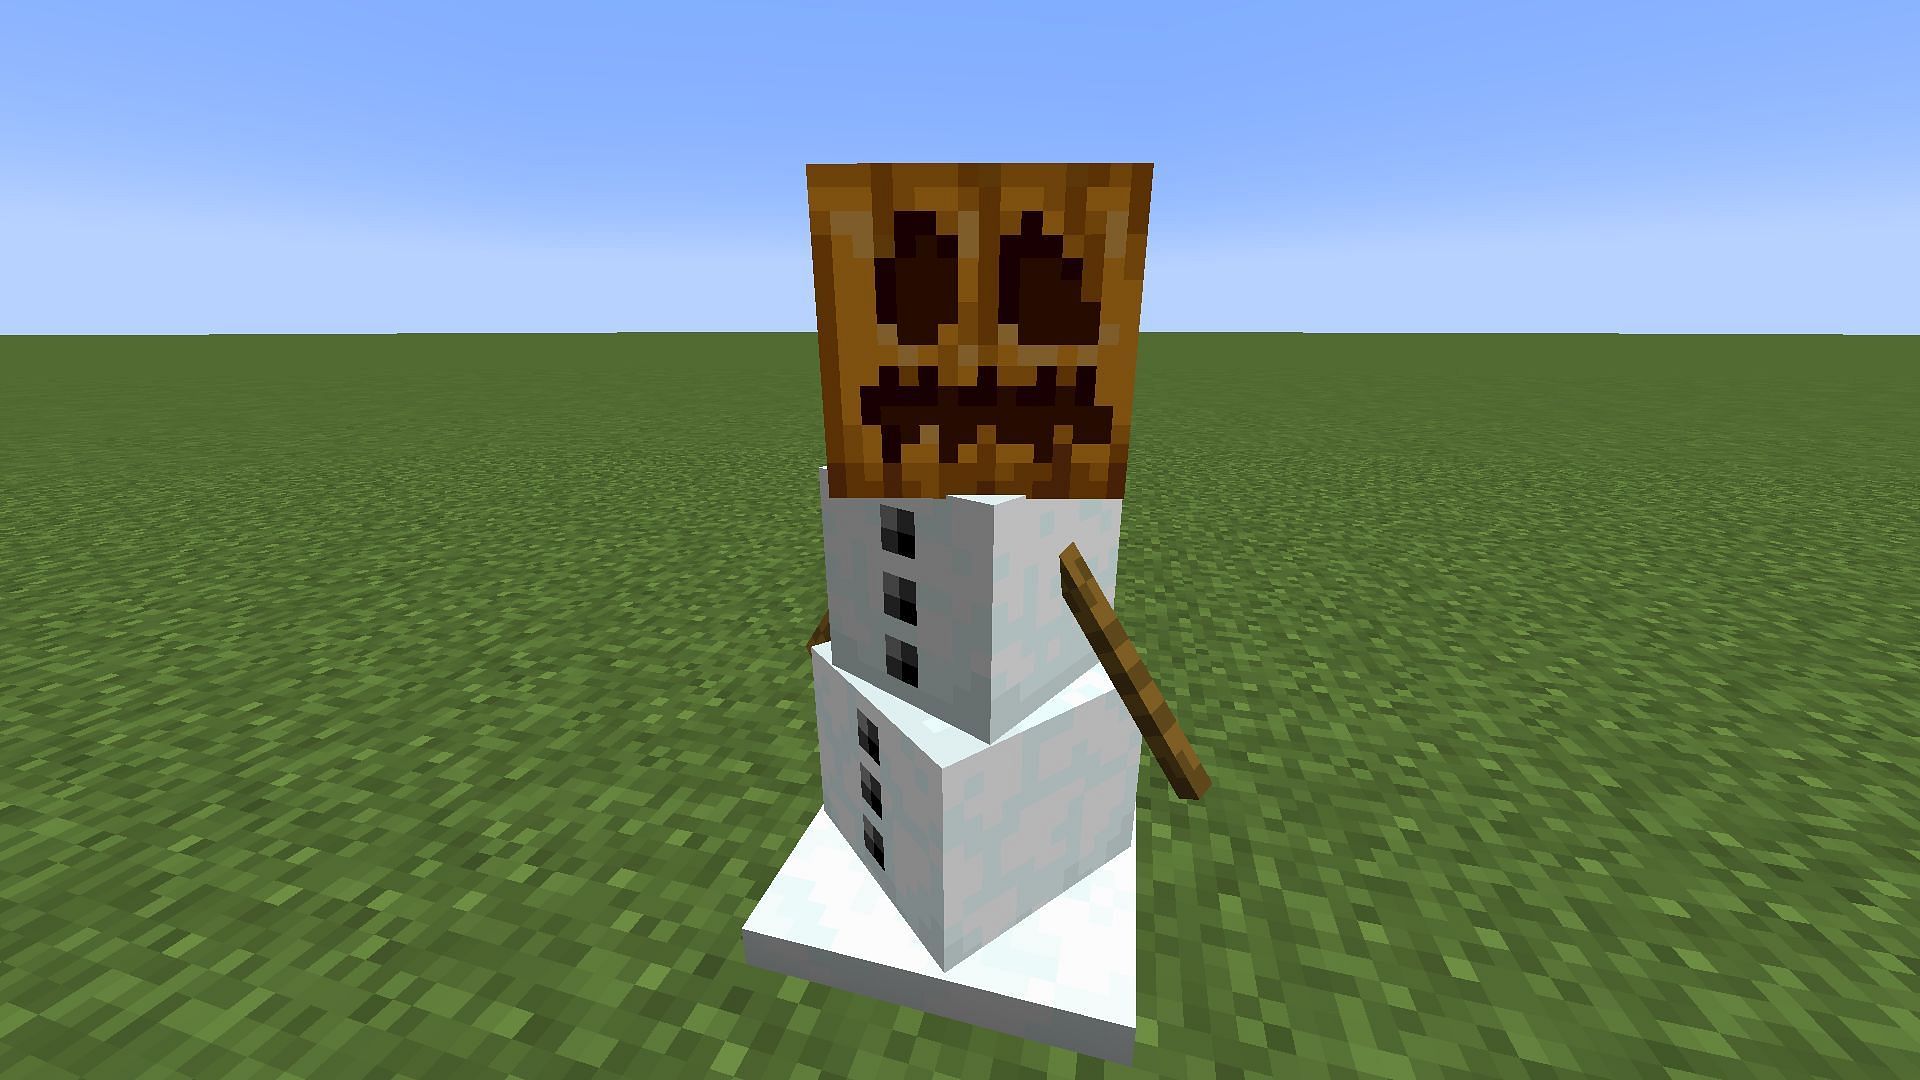 Snow Golem is one of the few mobs that is affected by biome temperatures in the game (Image via Minecraft)